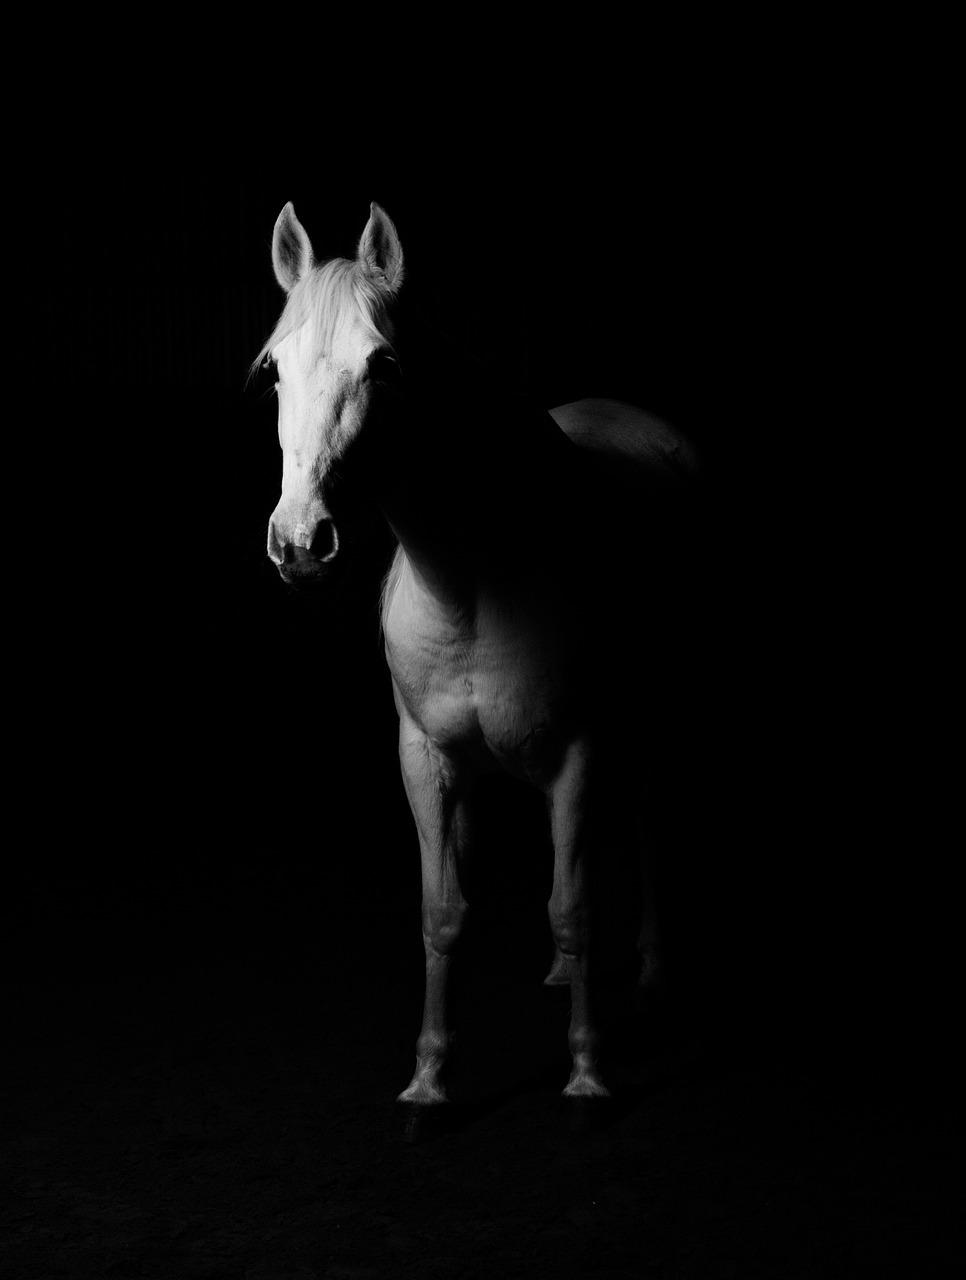 Uncovering the Mysterious Spiritual Vision of a Horse